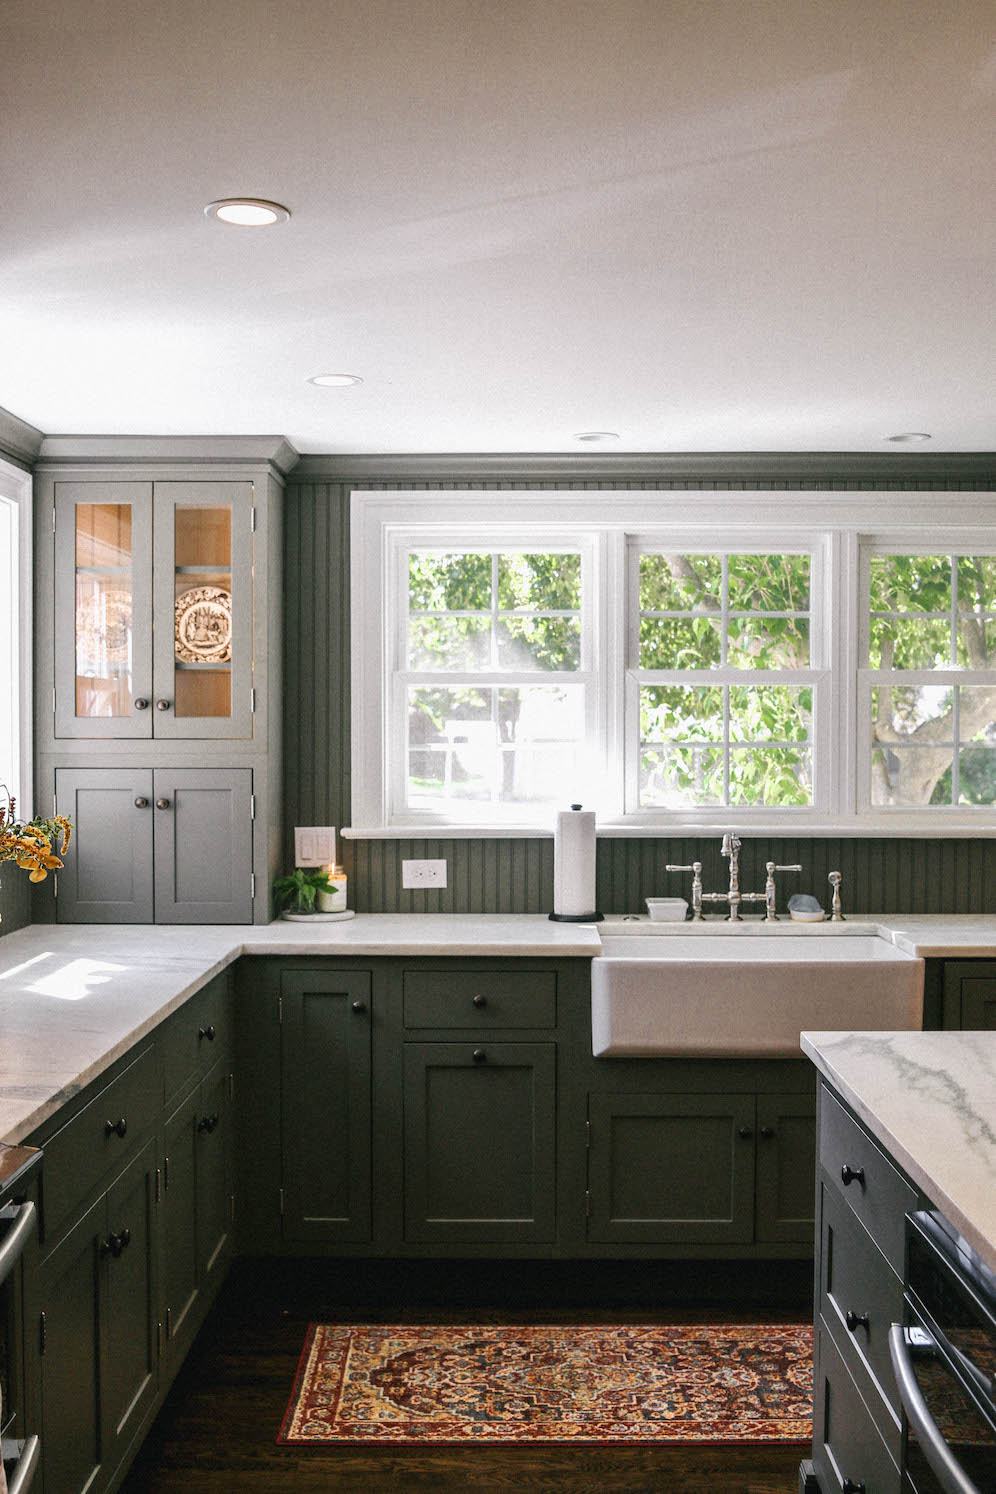 Mixing Hardware Metals In The Kitchen The Coastal Confidence by Aubrey Yandow